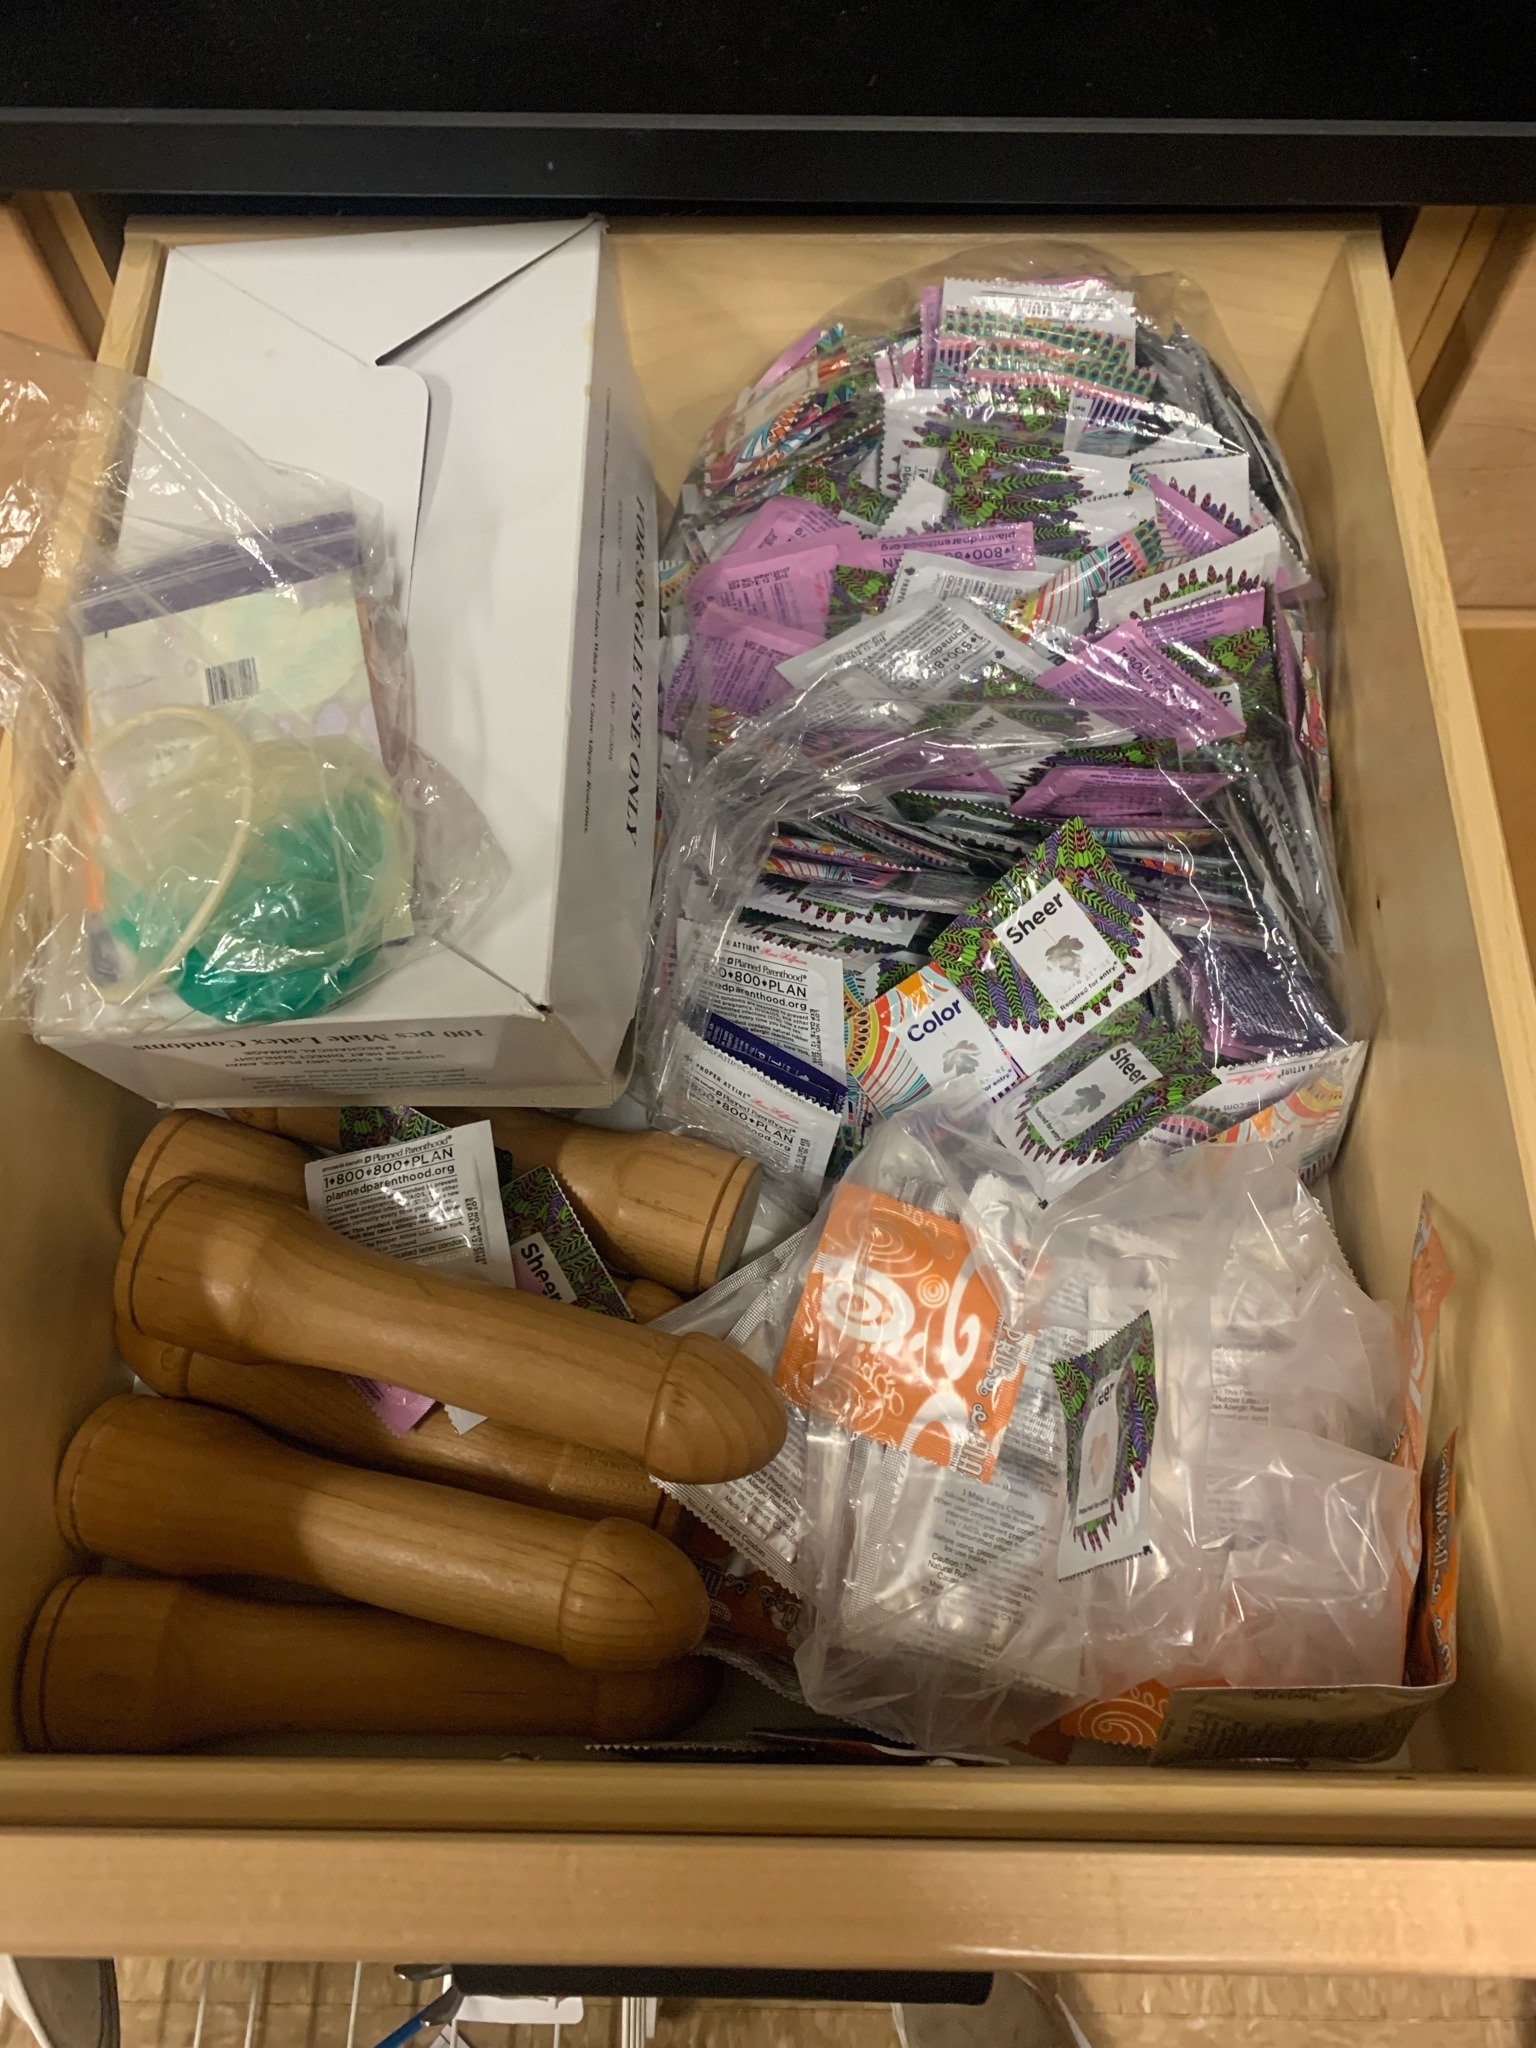 kroseteaches:kroseteaches:kroseteaches:Today, on this fateful day in sex ed, I have to teach 25 9th graders how to put condoms on wooden dicks without losing my composure. Wish me luck lmaoNow to find a way to discreetly transport this entire drawer to